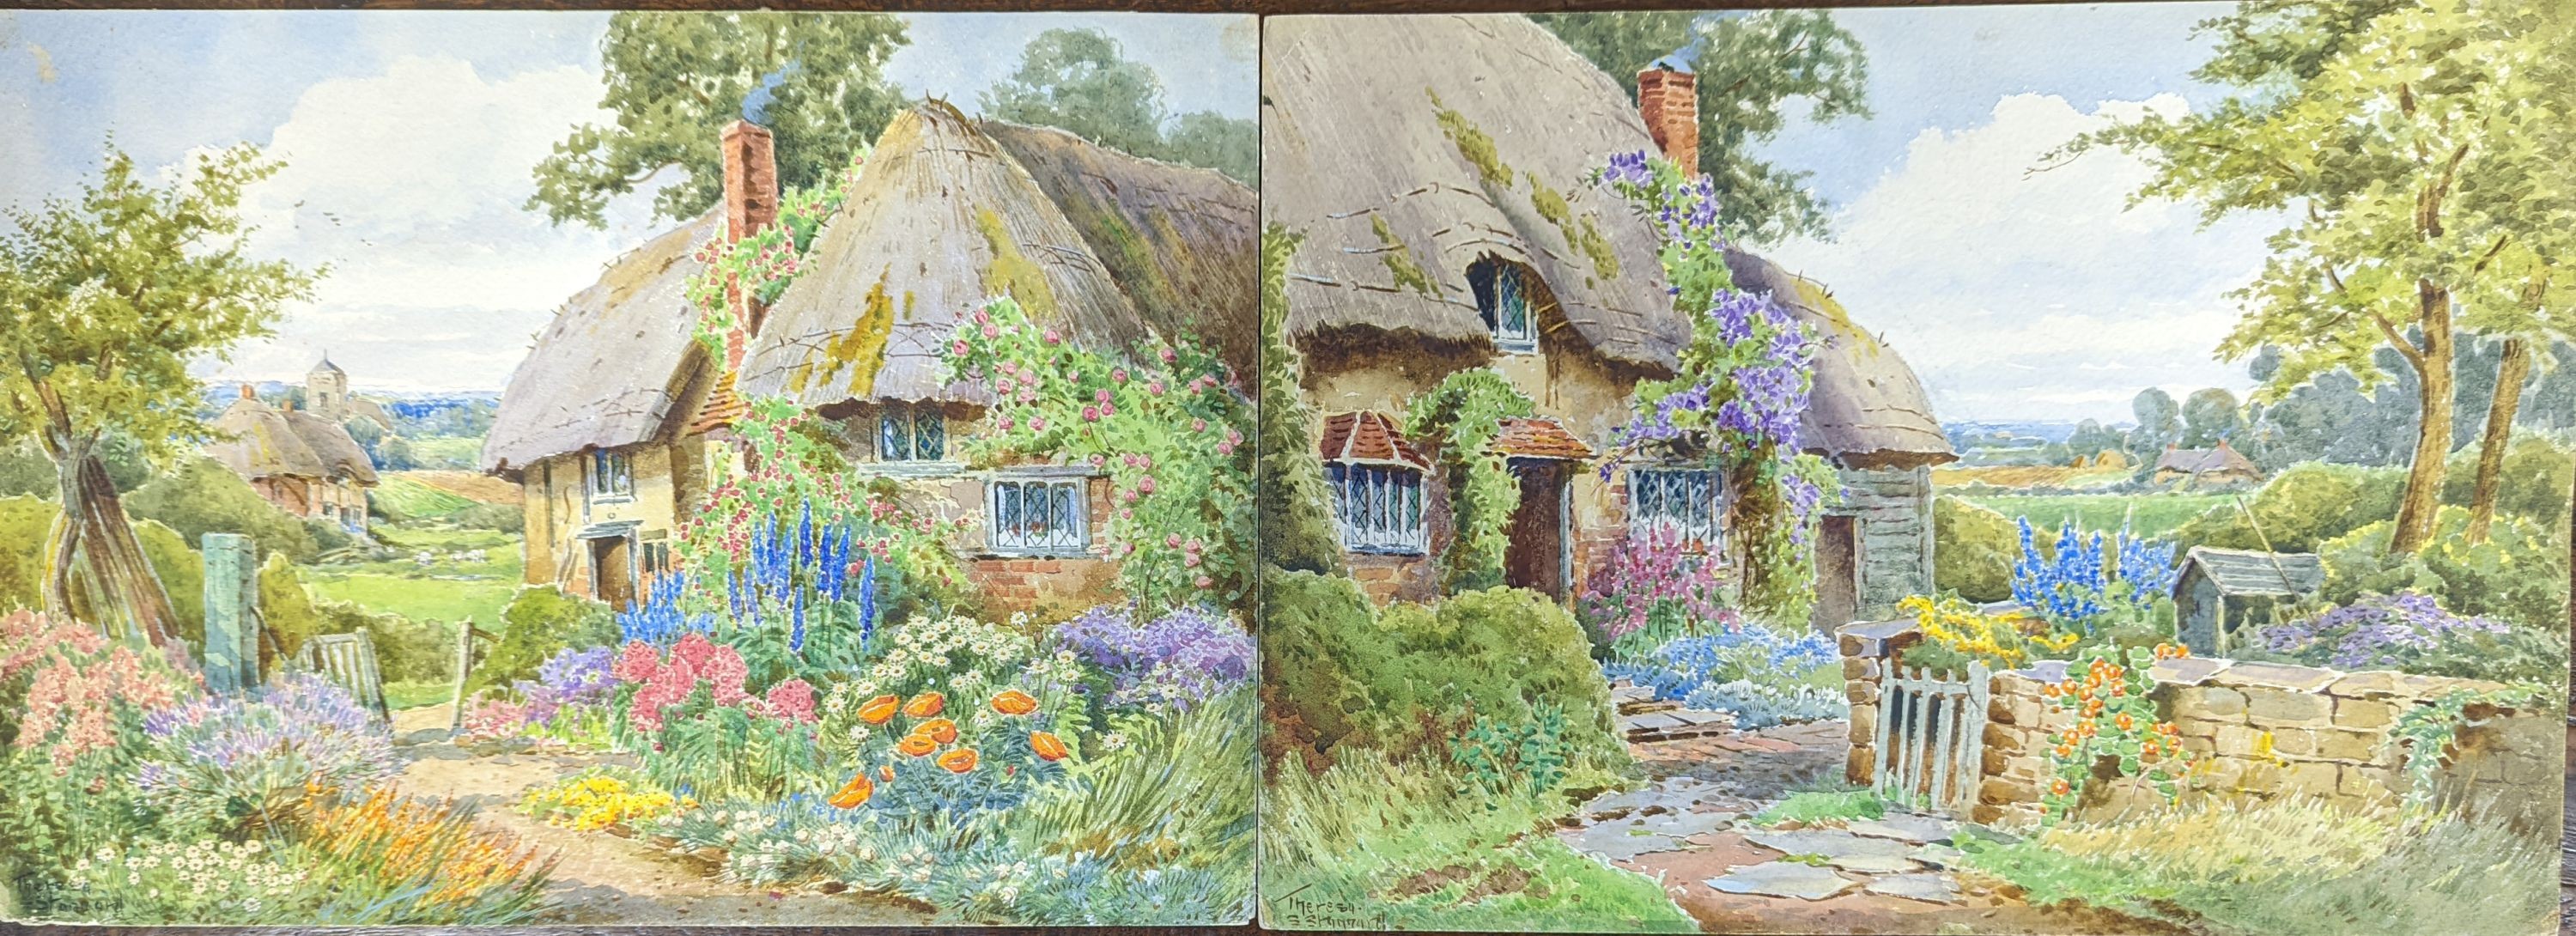 Theresa S. Stannard (1898-1947), two watercolours, 'In An Old World Garden' & Cottage with garden, signed, 27 x 38cm. both unframed.